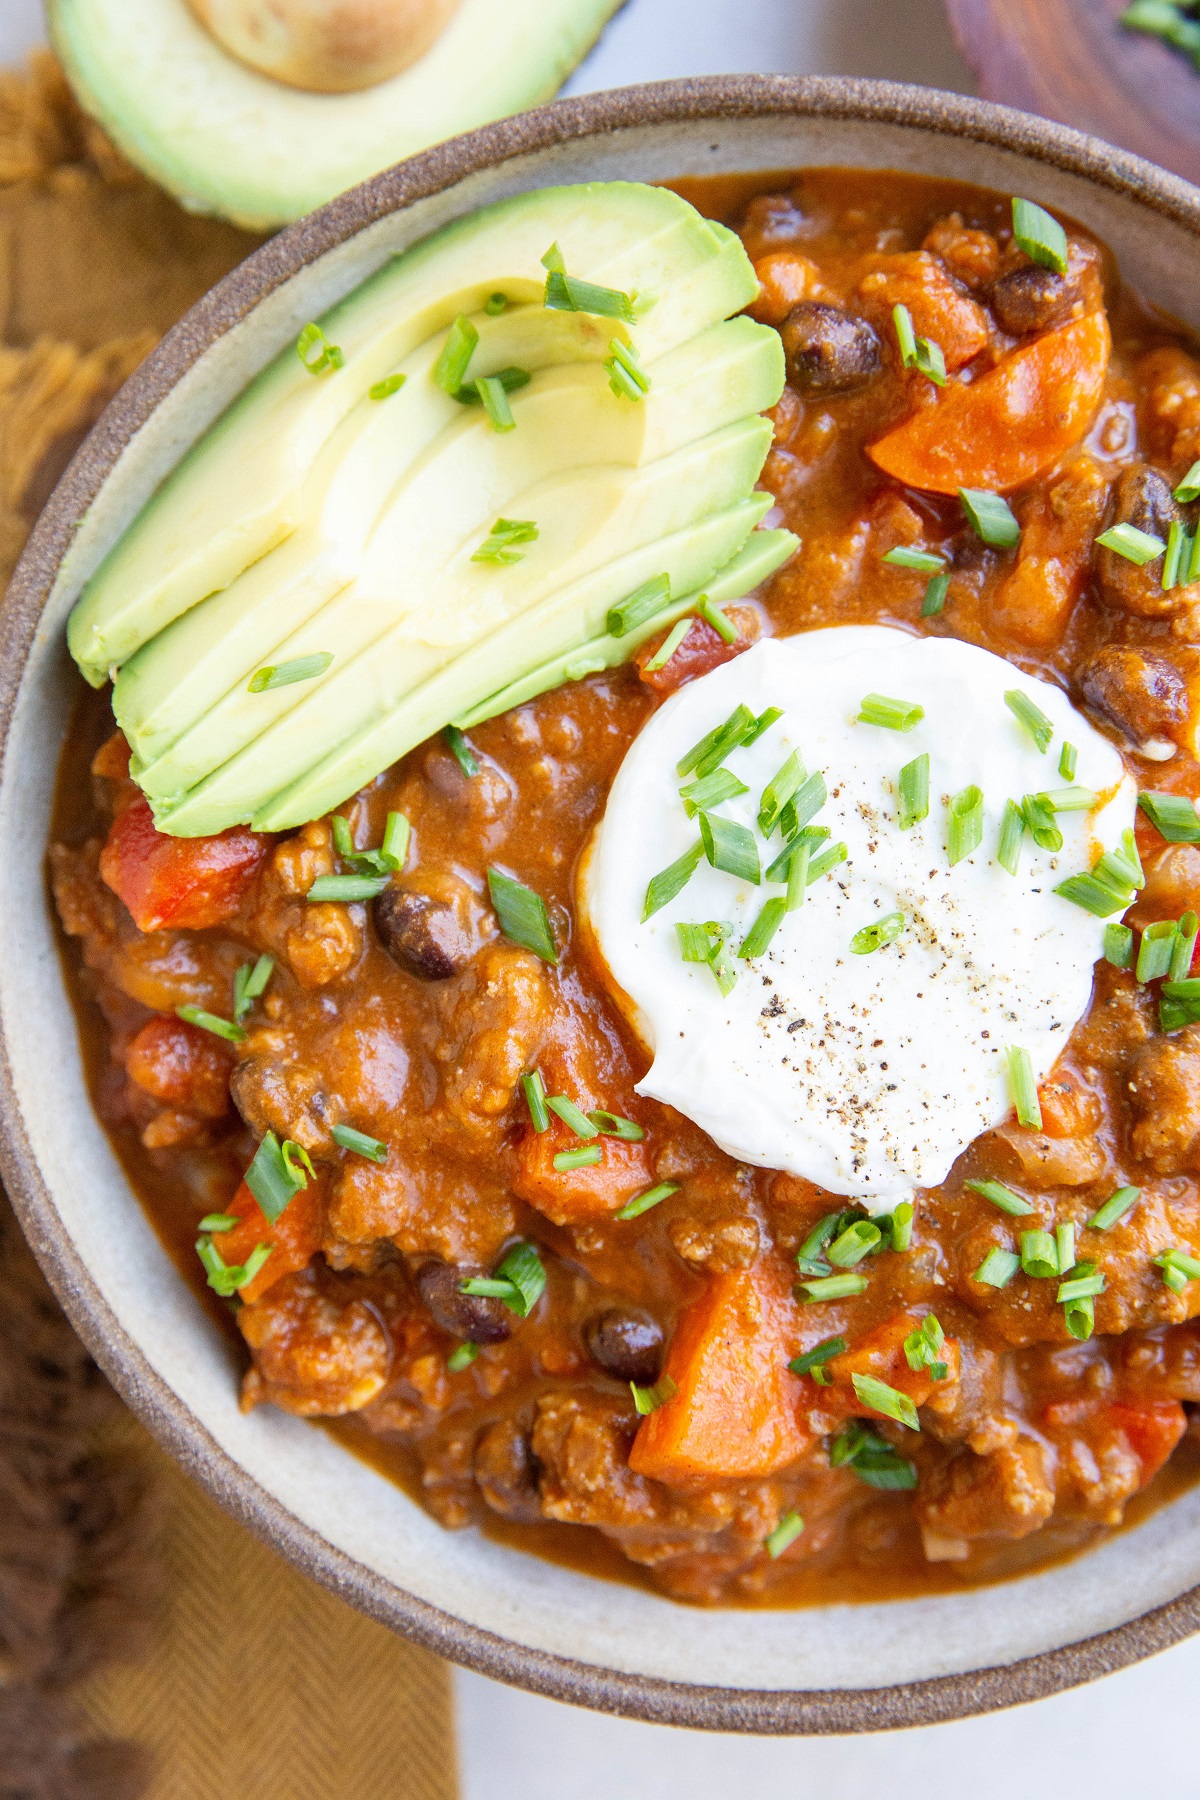 Large bowl of pumpkin chili with sliced avocado, chopped chives, and sour cream on top.